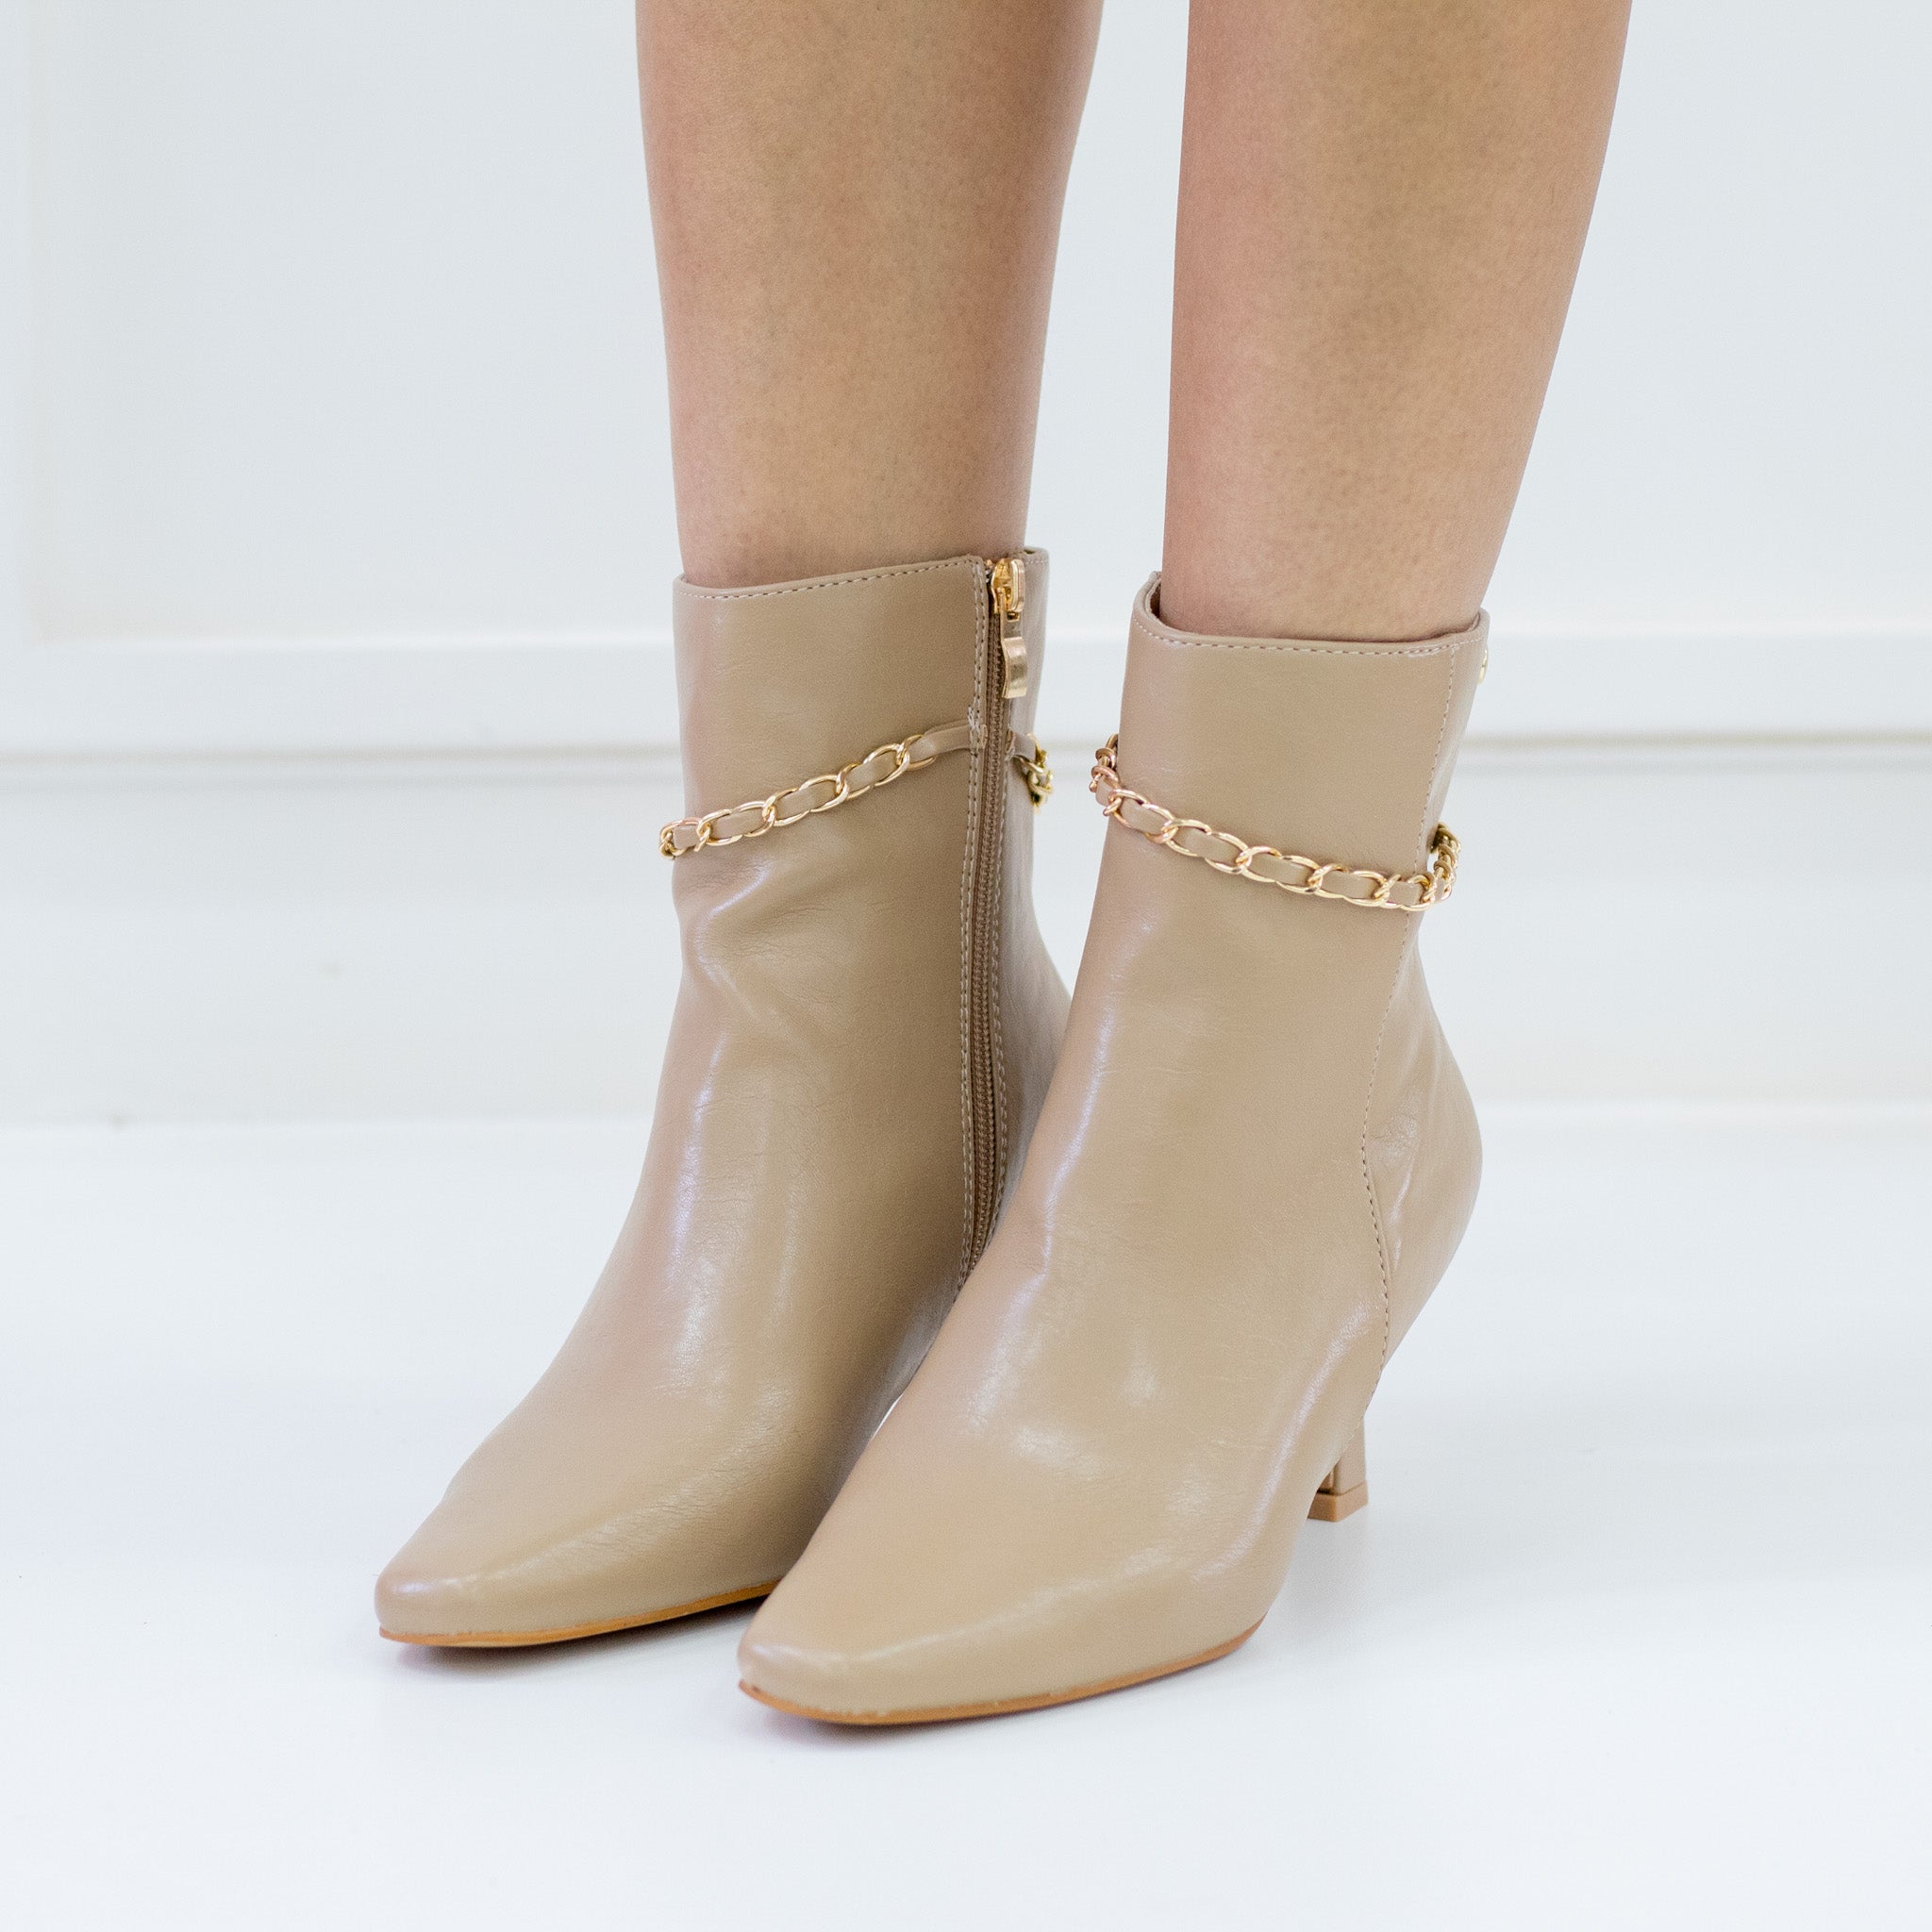 Beige 7cm heel faux leather pu ankle boot preview